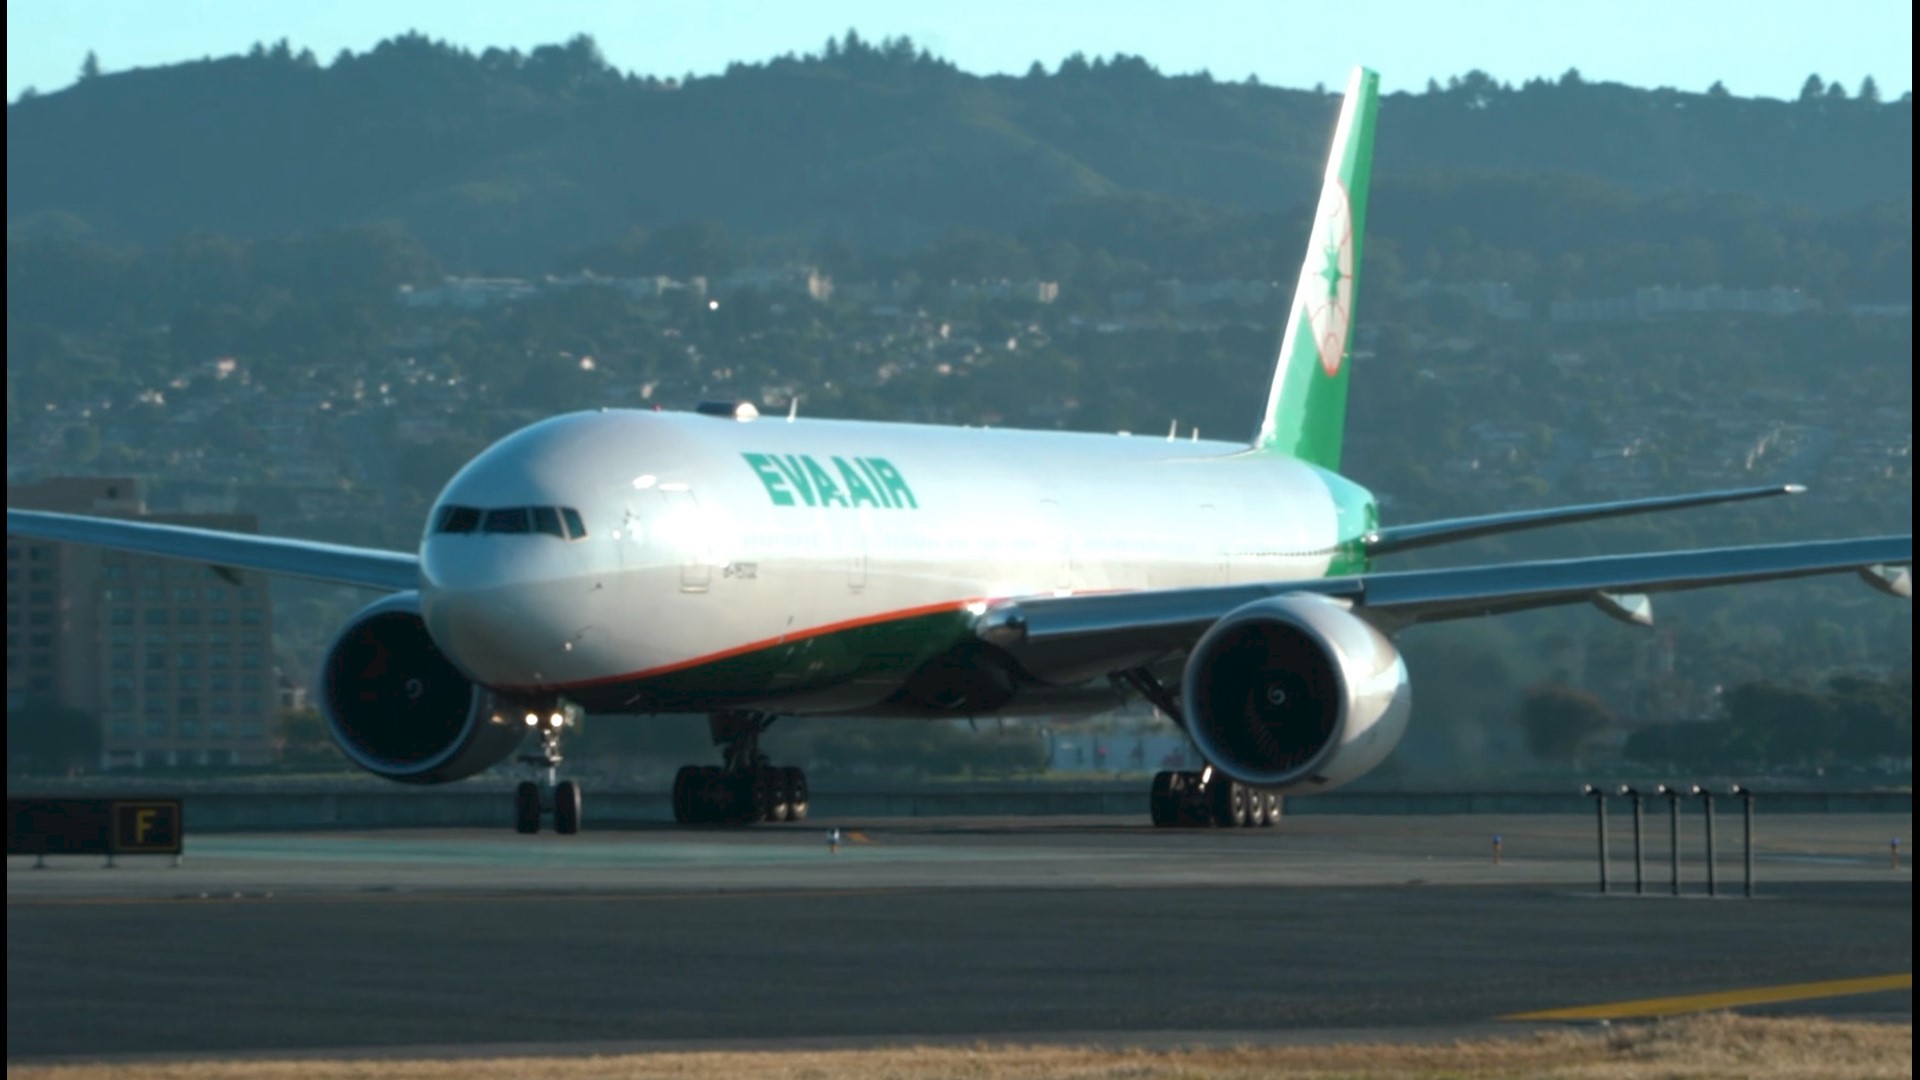 Taiwan's Eva Air is helping people find love 30,000 feet above ground. Buzz60's Maria Mercedes Galuppo has the story.